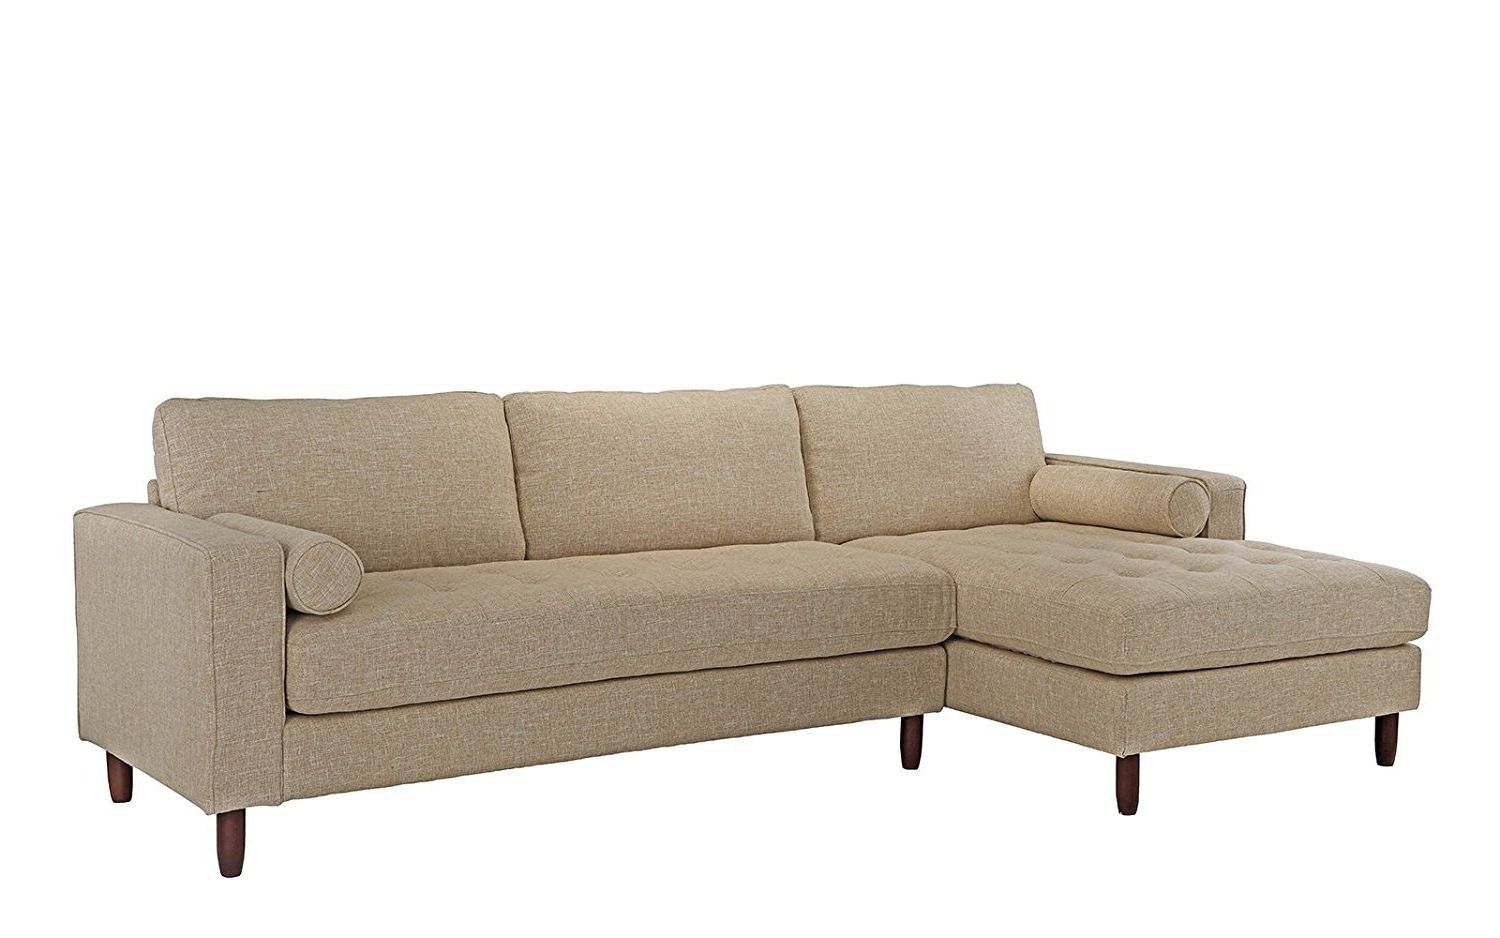 Mid Century Modern Tufted Fabric Sectional Sofa, L Shape Couch Beige Regarding Small L Shaped Sectional Sofas In Beige (Gallery 8 of 20)